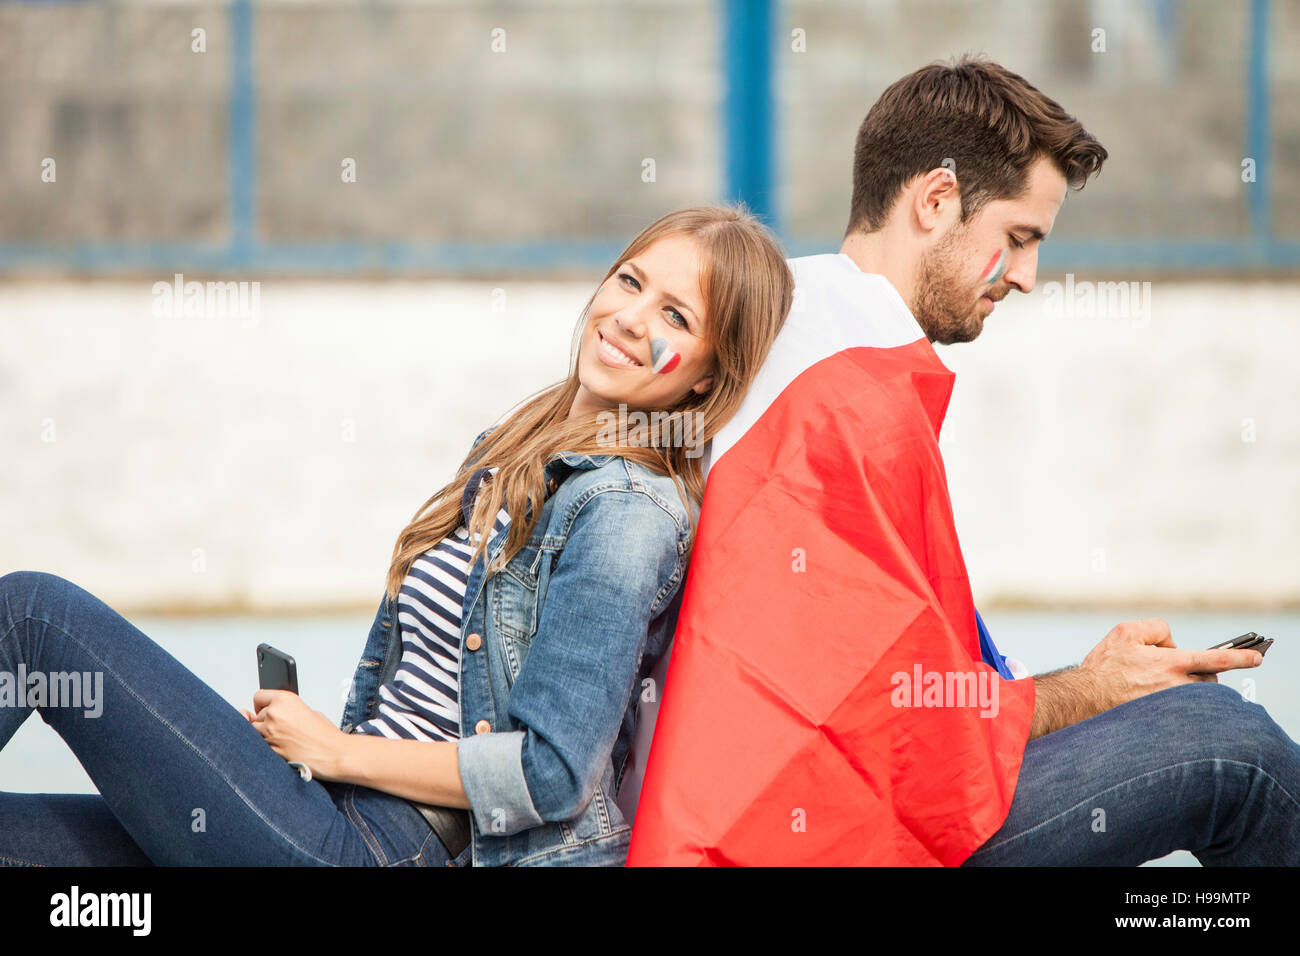 Male soccer fan and girlfriend sitting back to back Stock Photo